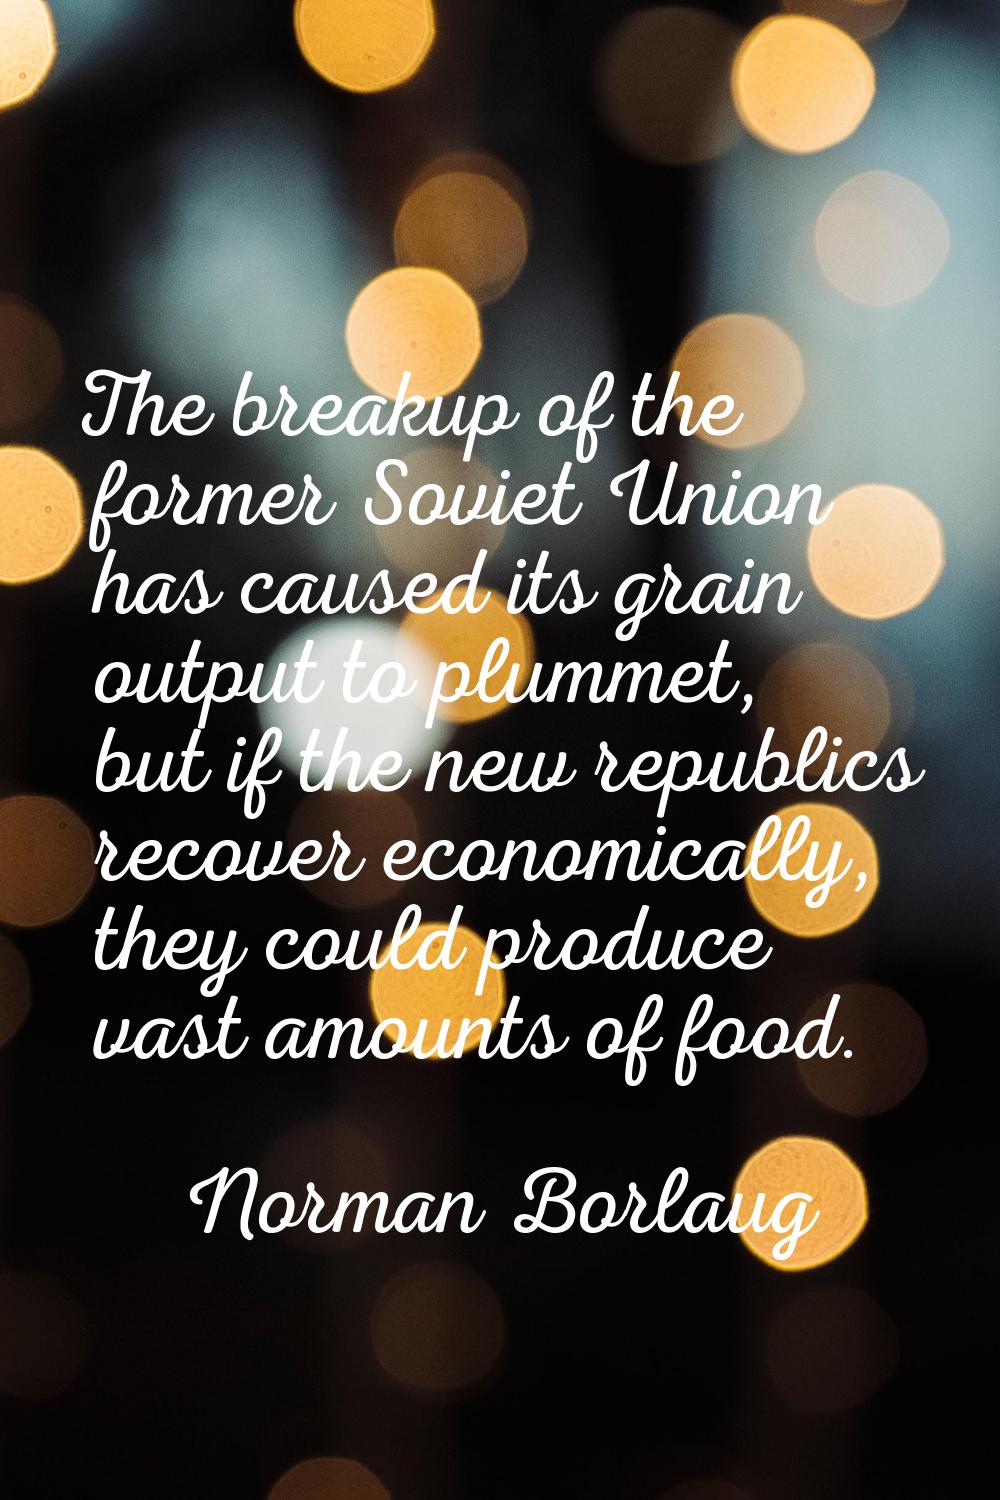 The breakup of the former Soviet Union has caused its grain output to plummet, but if the new repub